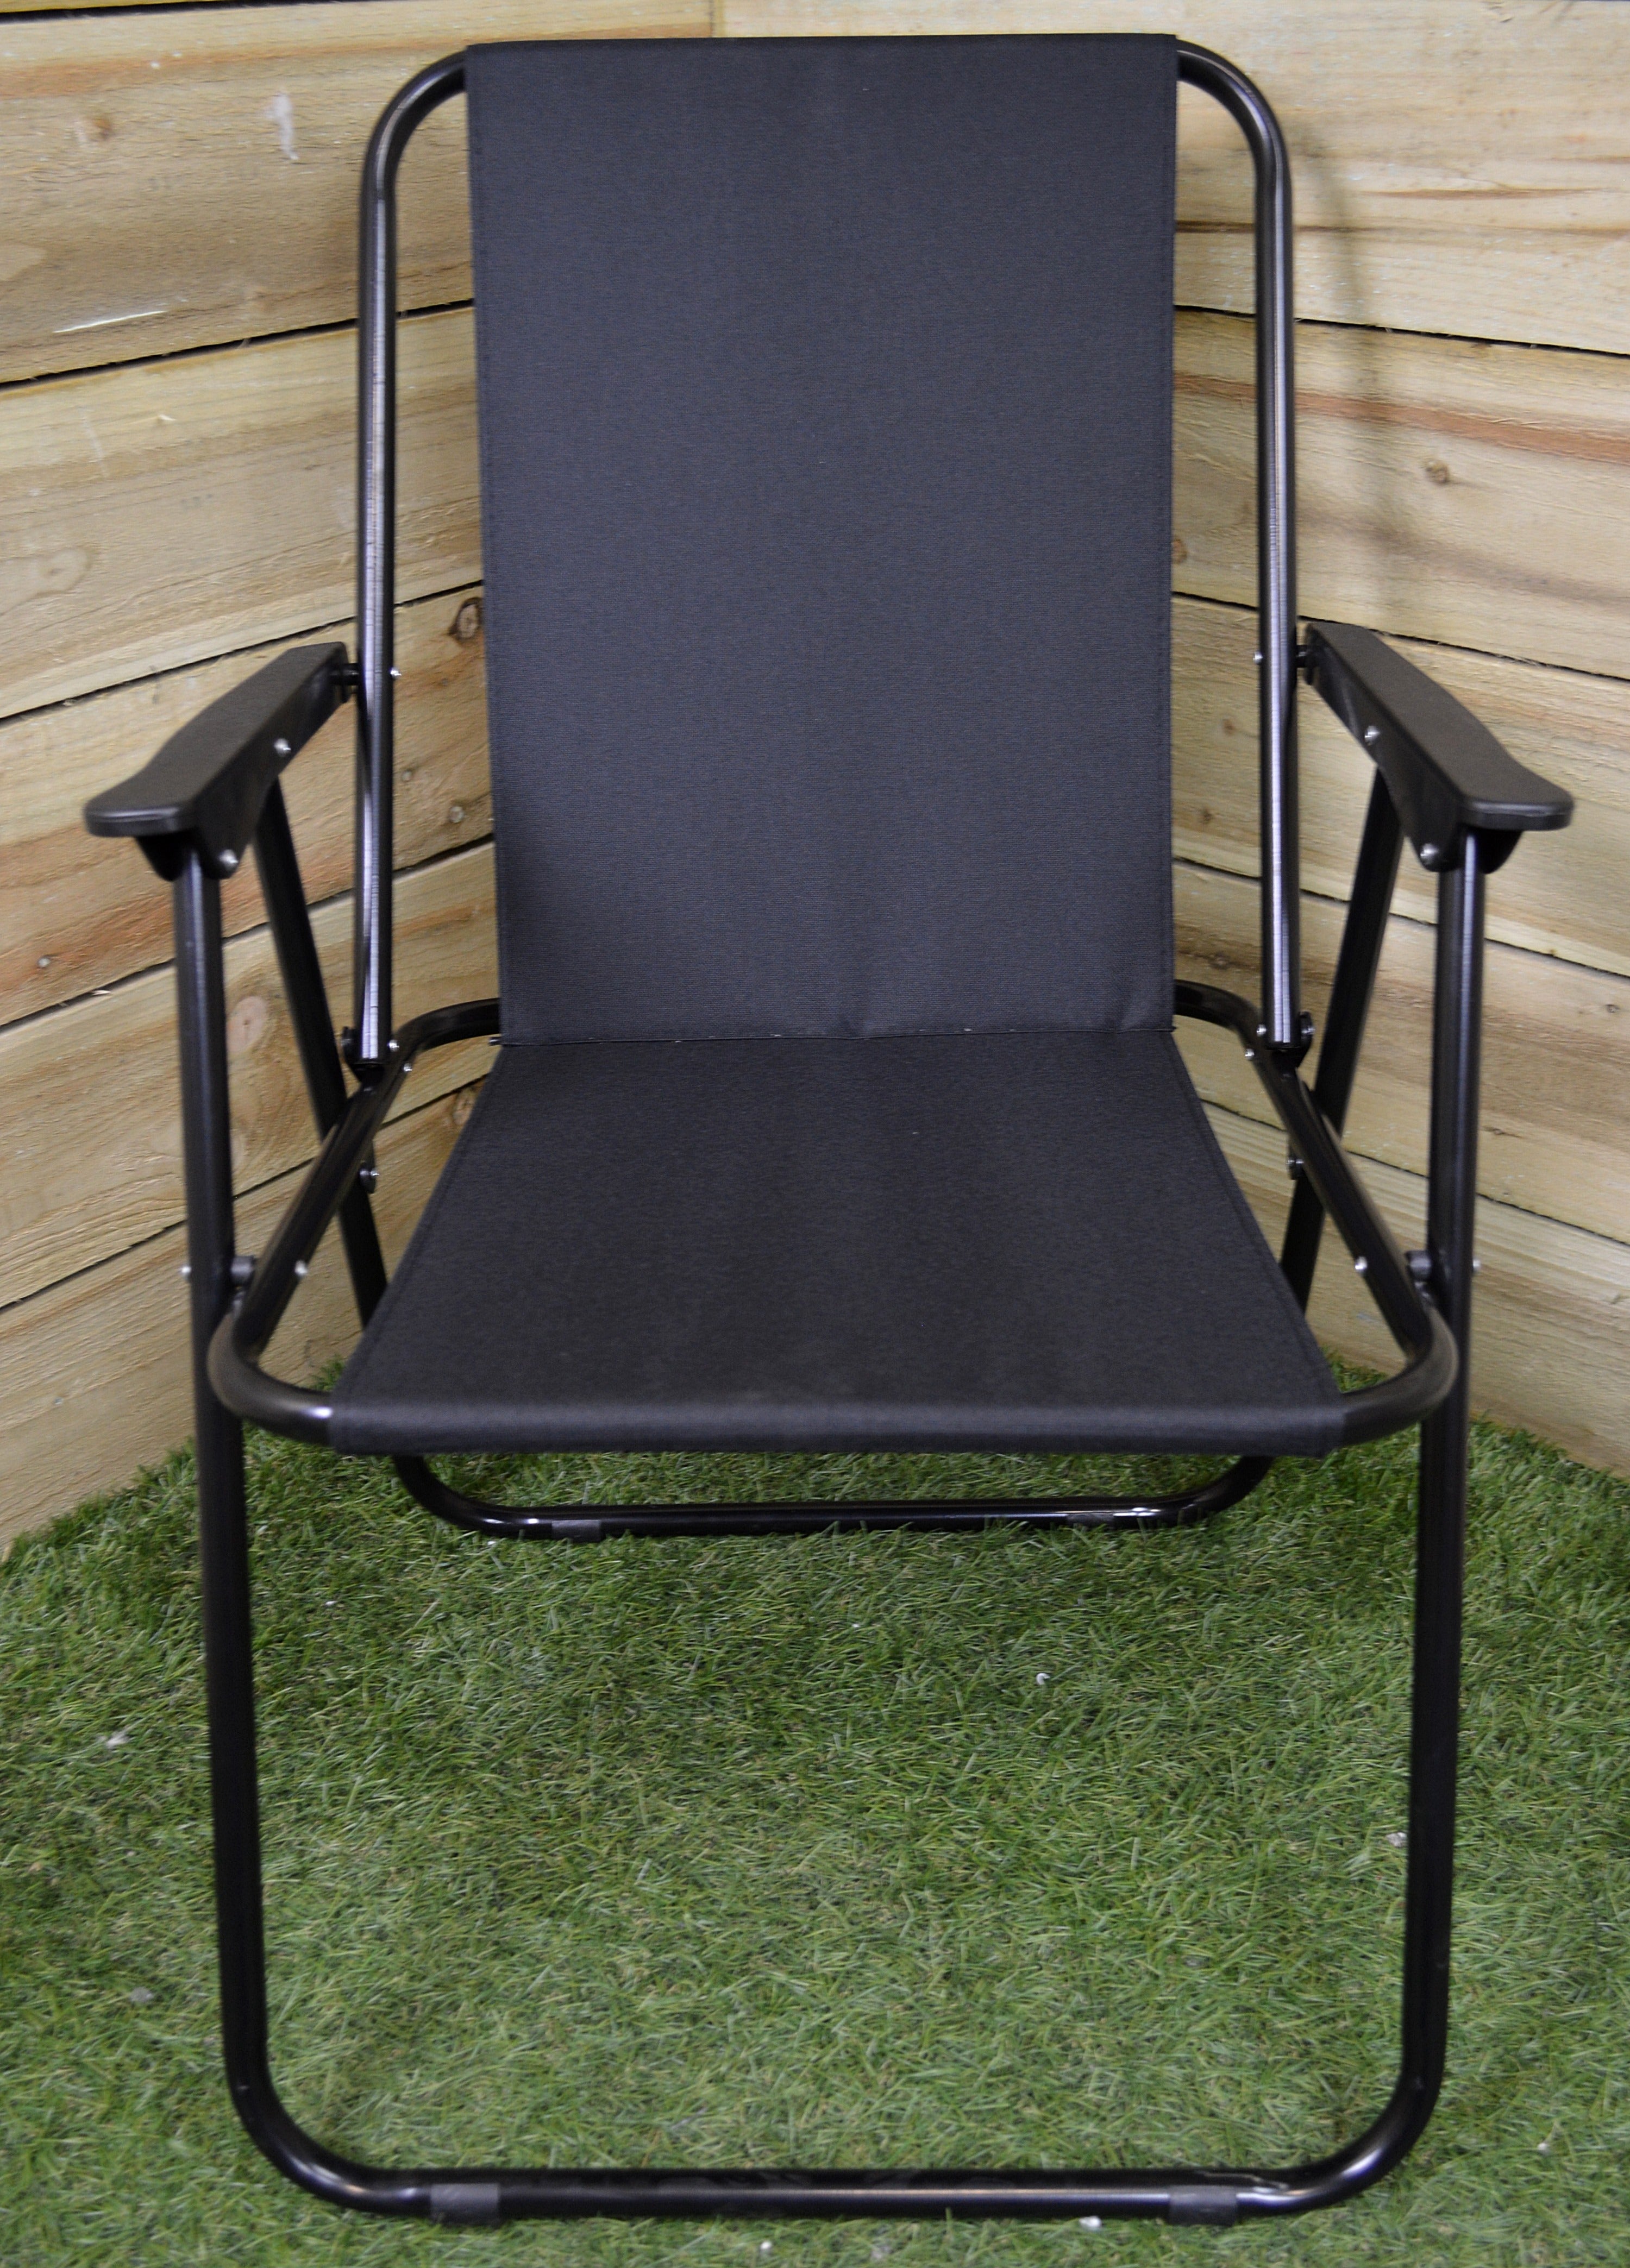 Black Folding Canvas Camping / Festival / Outdoor Chair with Plastic Arm Rests